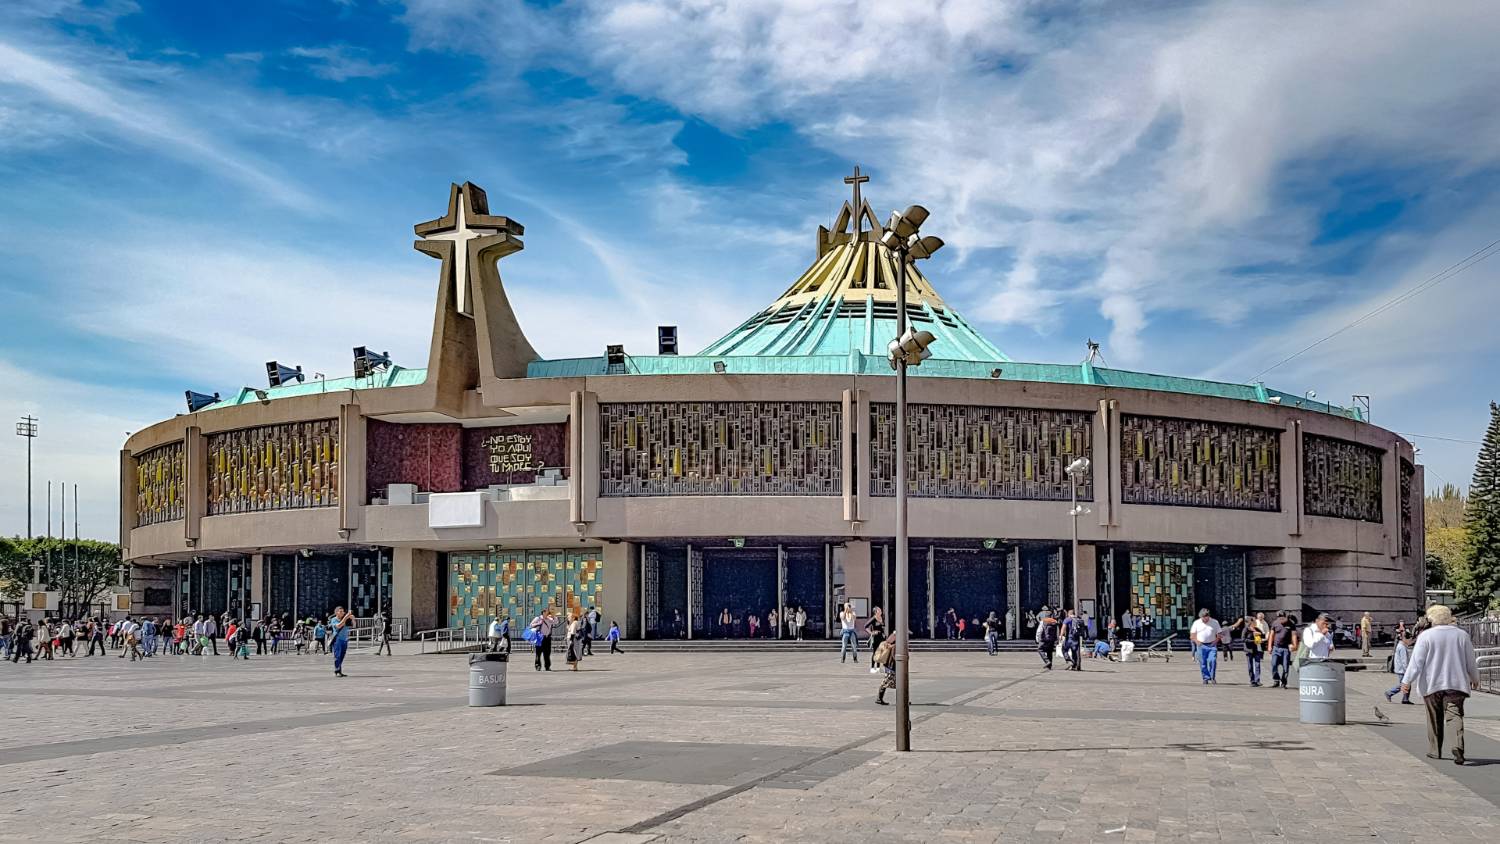 The Basilica of Our Lady of Guadalupe can accommodate up to 10,000 worshippers at a time (Creative Commons)